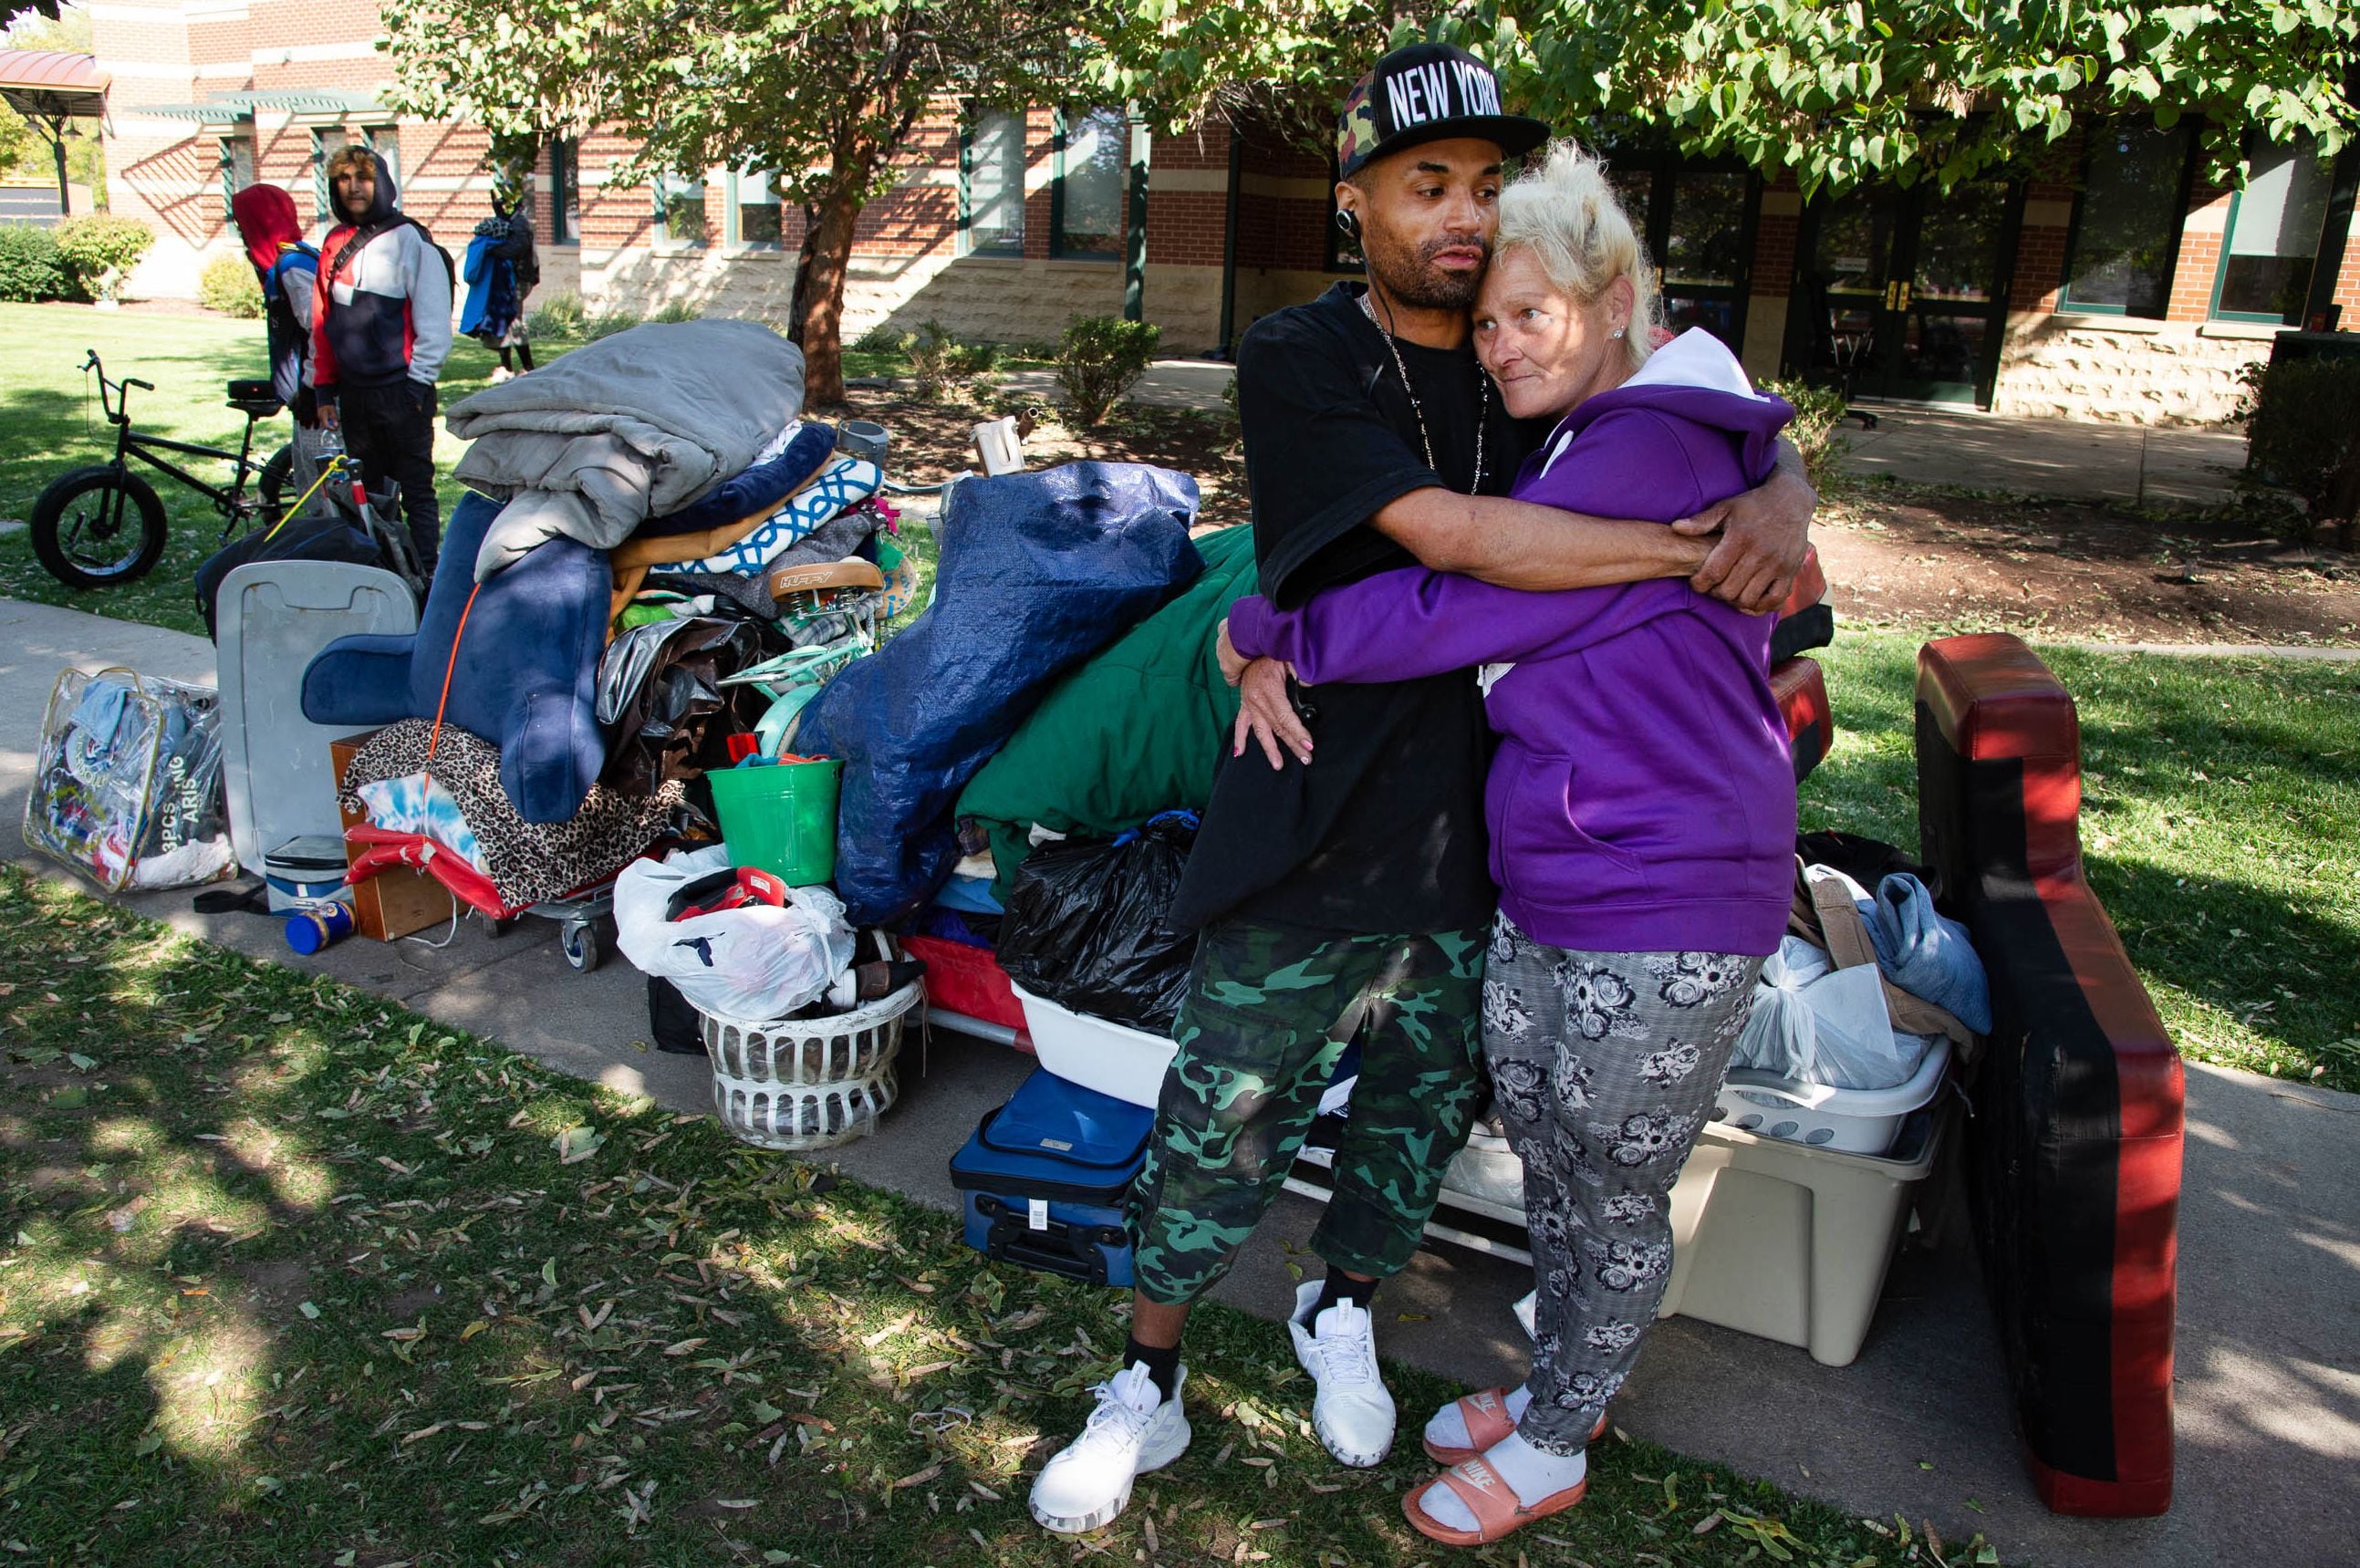 (Francisco Kjolseth  |  The Salt Lake Tribune) Raymond Wilkerson and Jonnie Vierra embrace at the Salt Lake County Health Department, backed by police, forces a clean up of homeless camps set up near Taufer Park in Salt Lake City on Thursday, Sept. 10, 2020, while homeless advocates confronted the police abhorring their actions.